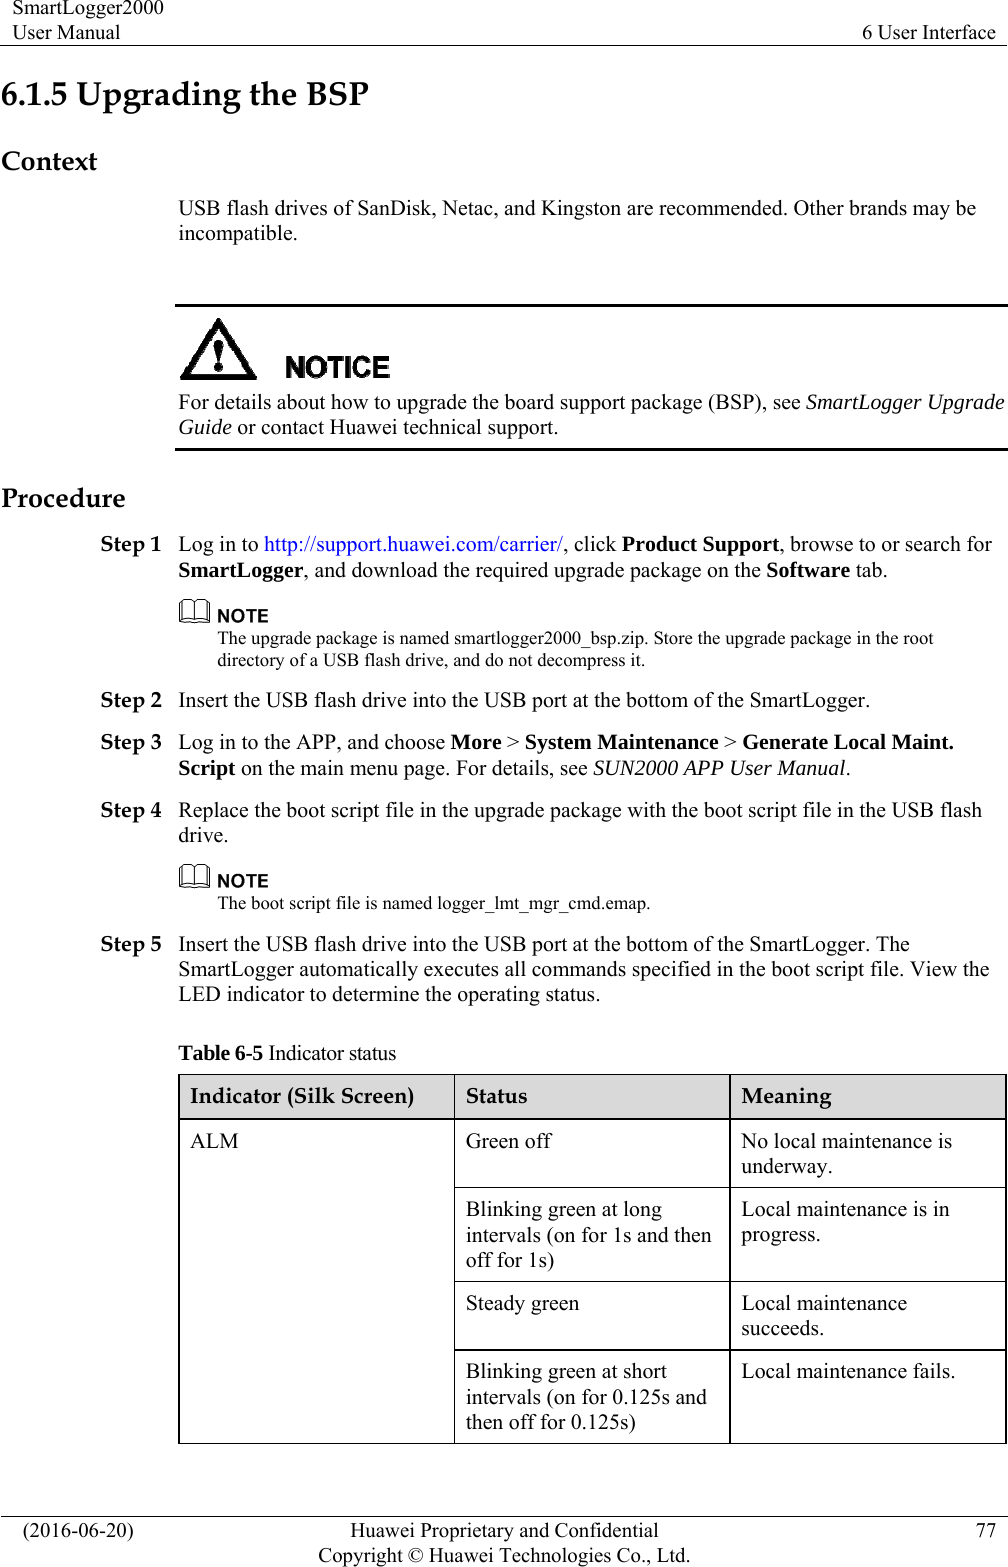 SmartLogger2000 User Manual  6 User Interface   (2016-06-20)  Huawei Proprietary and Confidential         Copyright © Huawei Technologies Co., Ltd.77 6.1.5 Upgrading the BSP Context USB flash drives of SanDisk, Netac, and Kingston are recommended. Other brands may be incompatible.   For details about how to upgrade the board support package (BSP), see SmartLogger Upgrade Guide or contact Huawei technical support. Procedure Step 1 Log in to http://support.huawei.com/carrier/, click Product Support, browse to or search for SmartLogger, and download the required upgrade package on the Software tab.    The upgrade package is named smartlogger2000_bsp.zip. Store the upgrade package in the root directory of a USB flash drive, and do not decompress it.   Step 2 Insert the USB flash drive into the USB port at the bottom of the SmartLogger. Step 3 Log in to the APP, and choose More &gt; System Maintenance &gt; Generate Local Maint. Script on the main menu page. For details, see SUN2000 APP User Manual.  Step 4 Replace the boot script file in the upgrade package with the boot script file in the USB flash drive.  The boot script file is named logger_lmt_mgr_cmd.emap.   Step 5 Insert the USB flash drive into the USB port at the bottom of the SmartLogger. The SmartLogger automatically executes all commands specified in the boot script file. View the LED indicator to determine the operating status.   Table 6-5 Indicator status Indicator (Silk Screen)  Status  Meaning ALM  Green off  No local maintenance is underway.  Blinking green at long intervals (on for 1s and then off for 1s) Local maintenance is in progress. Steady green  Local maintenance succeeds. Blinking green at short intervals (on for 0.125s and then off for 0.125s) Local maintenance fails. 